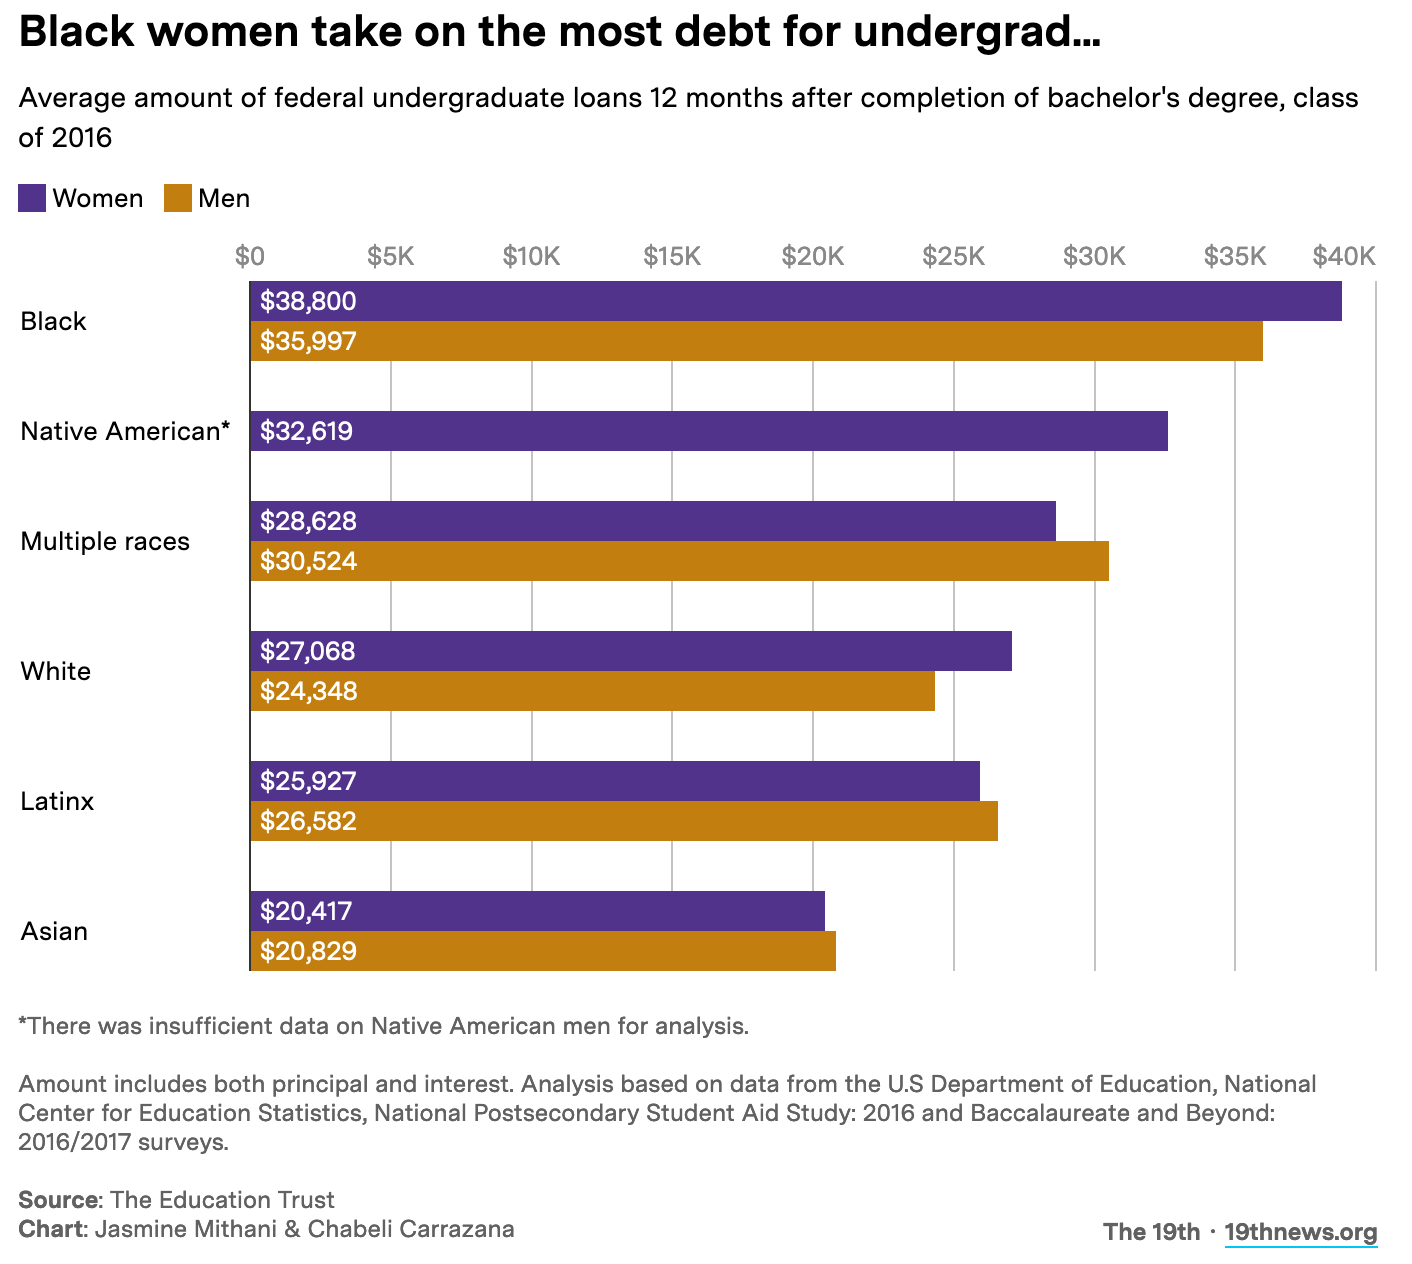 Bar chart showing that Black men and women have the largest amount of federal loans 12 months after completing a bachelor’s degree. The headline says “Black women take on the most debt for undergrad…” and the dek says “Average amount of federal undergraduate loans 12 months after completion of bachelor's degree, class of 2016.” The chart itself shows Black women have the most debt, at $38,800 on average; Black men have $35,997 on average. The next highest is Native American women, with $32,619. Asian women have the least debt on average, at $20,417. Underneath the chart is a note that “There was insufficient data on Native American men for analysis. Amount includes both principal and interest. Analysis based on data from the U.S Department of Education, National Center for Education Statistics, National Postsecondary Student Aid Study: 2016 and Baccalaureate and Beyond: 2016/2017 surveys.” The source is listed as The Education Trust and the chart was made by Jasmine Mithani and Chabeli Carrazana. In the bottom right corner there is small text that says “The 19th” and directs people to 19thnews.org.